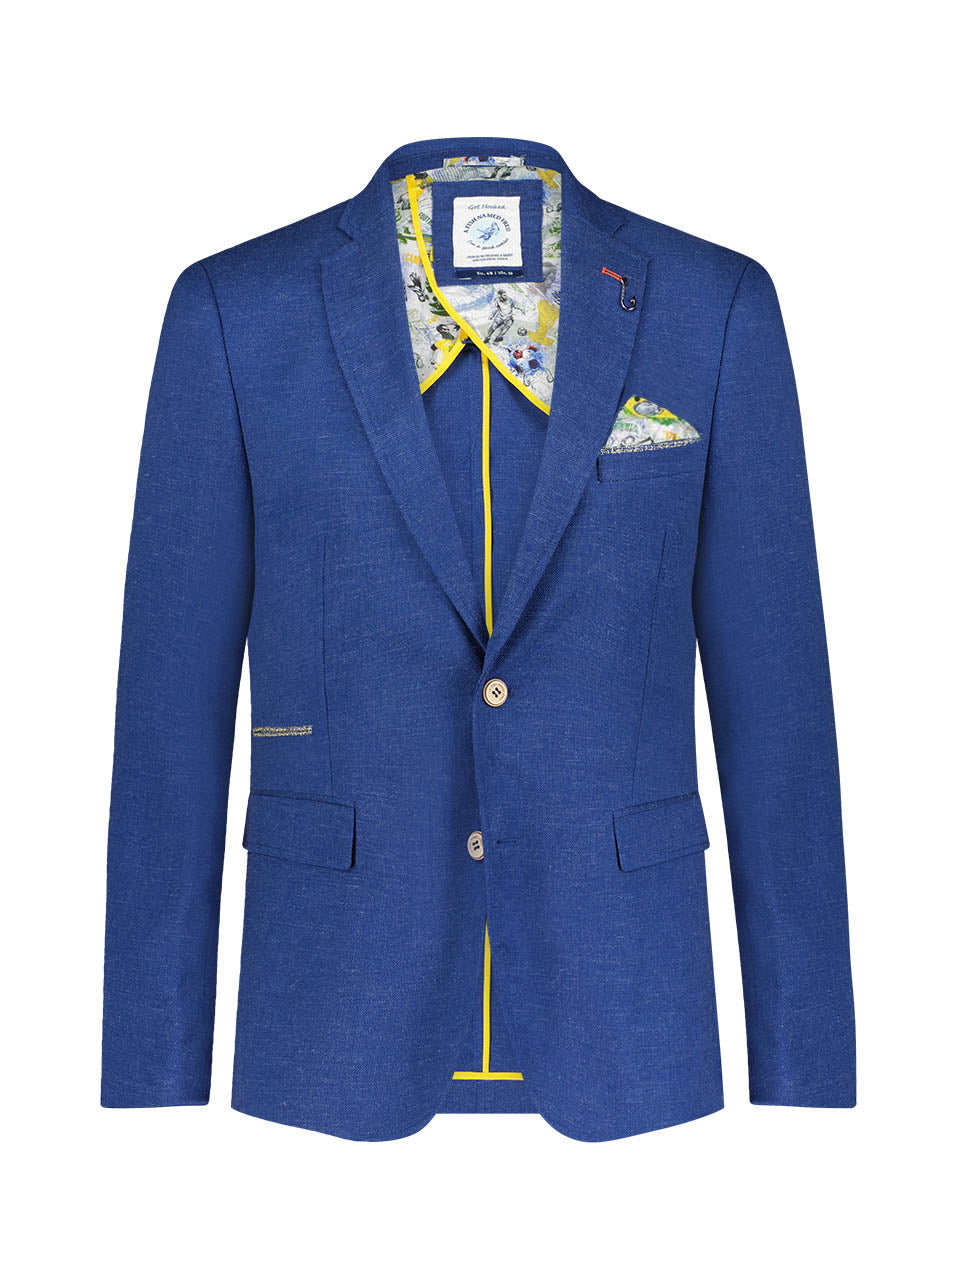 Blue Linen Look Men's Blazer by A Fish Named Fred